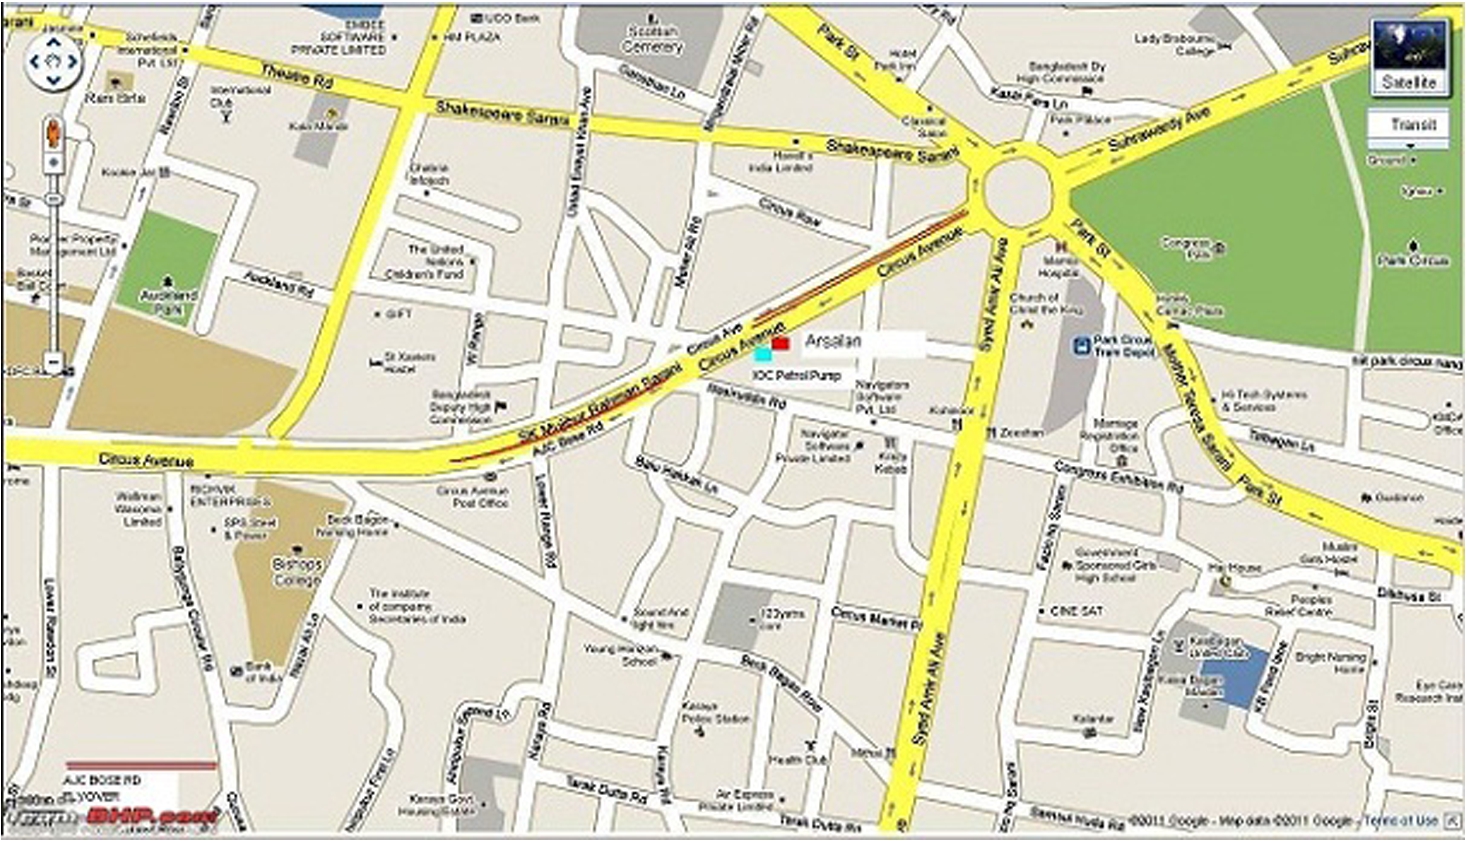 Seven point crossing park circus, Kolkata (collected from Google Map).